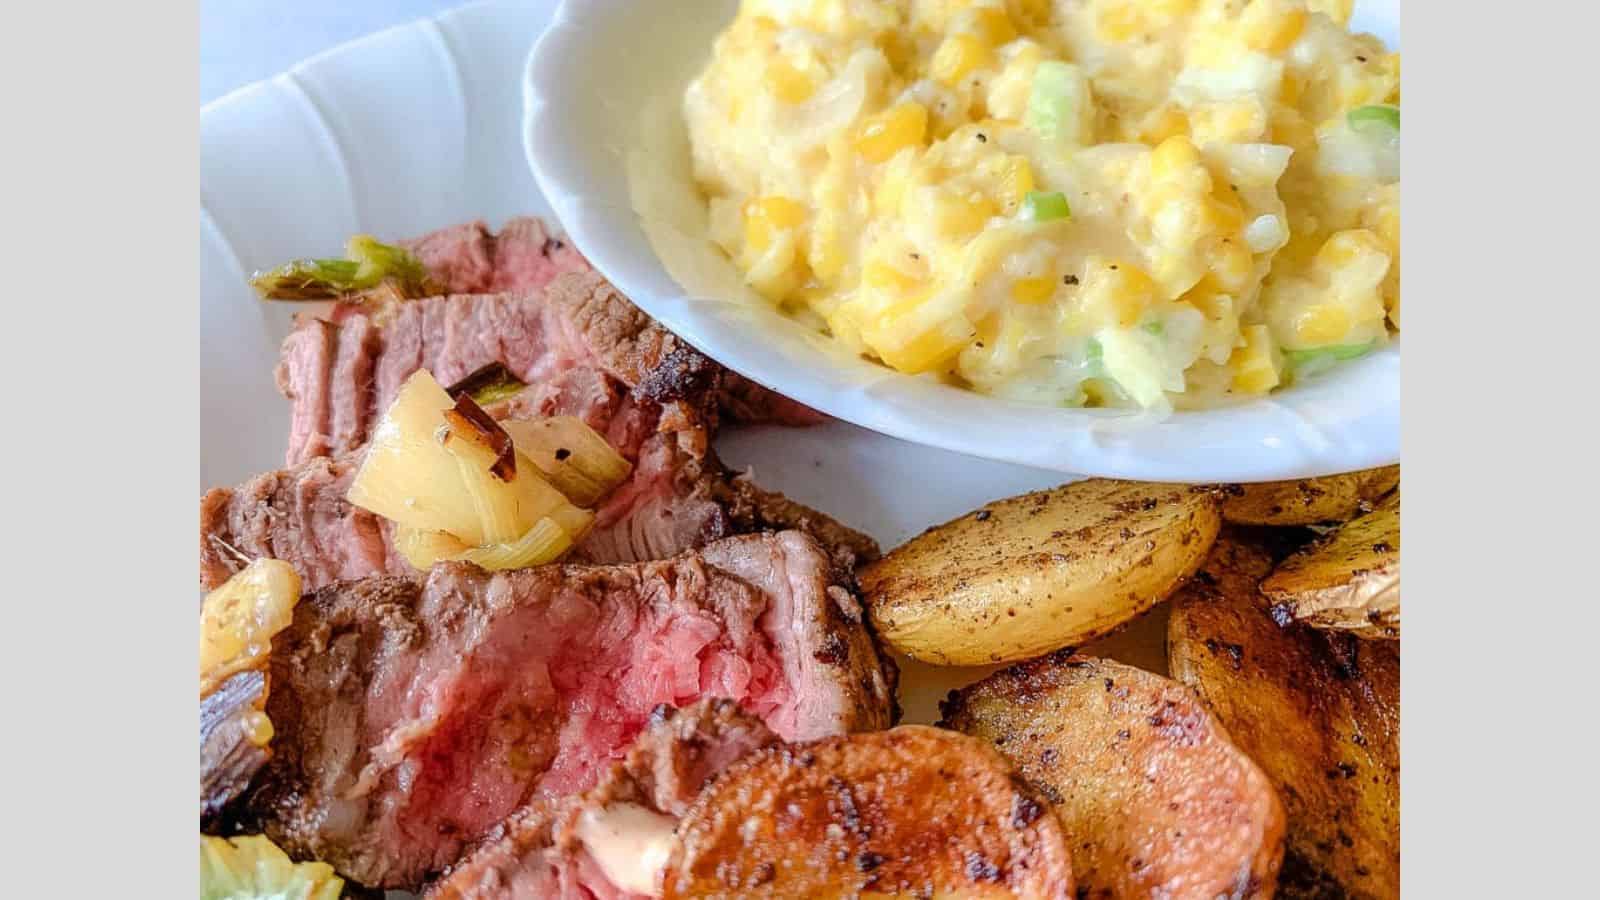 A plate filled with grilled steak, charred onions, potatoes, and creamed corn.